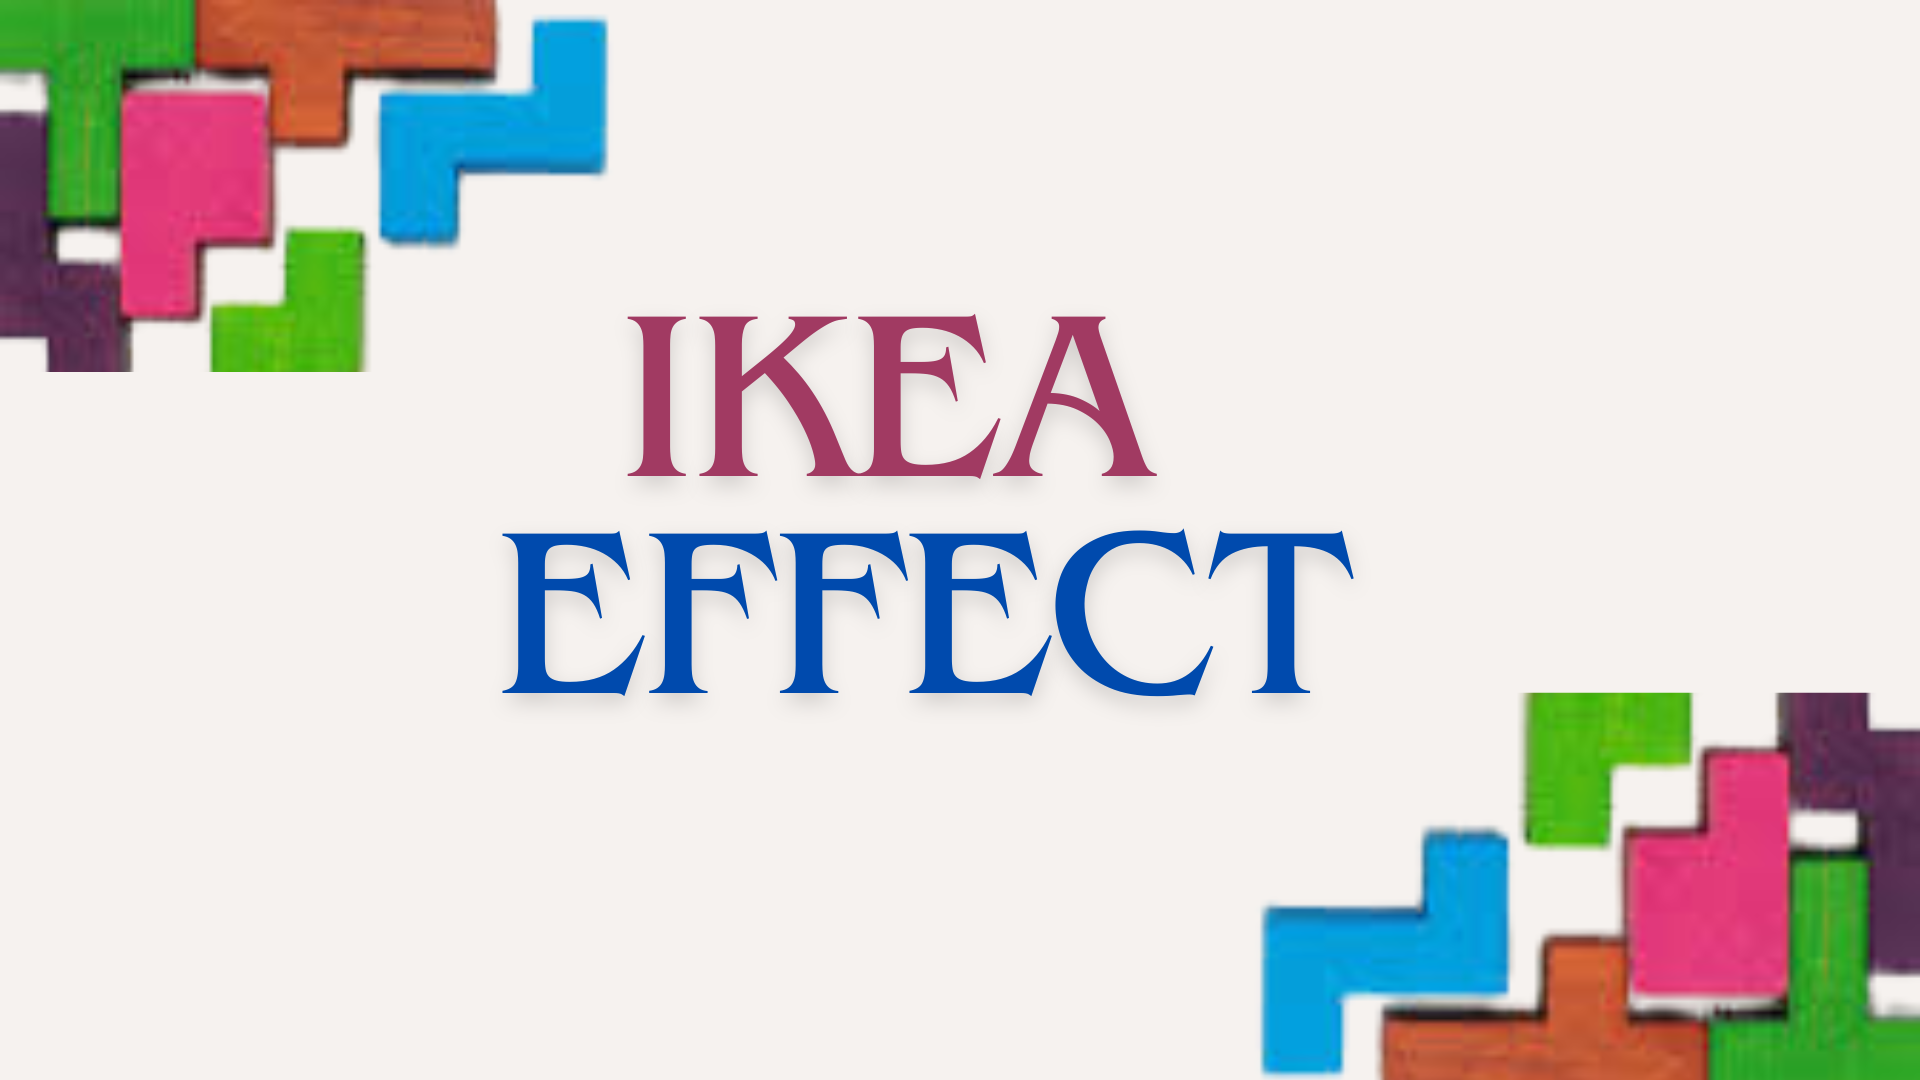 The IKEA effect: Using DIY product as a marketing strategy